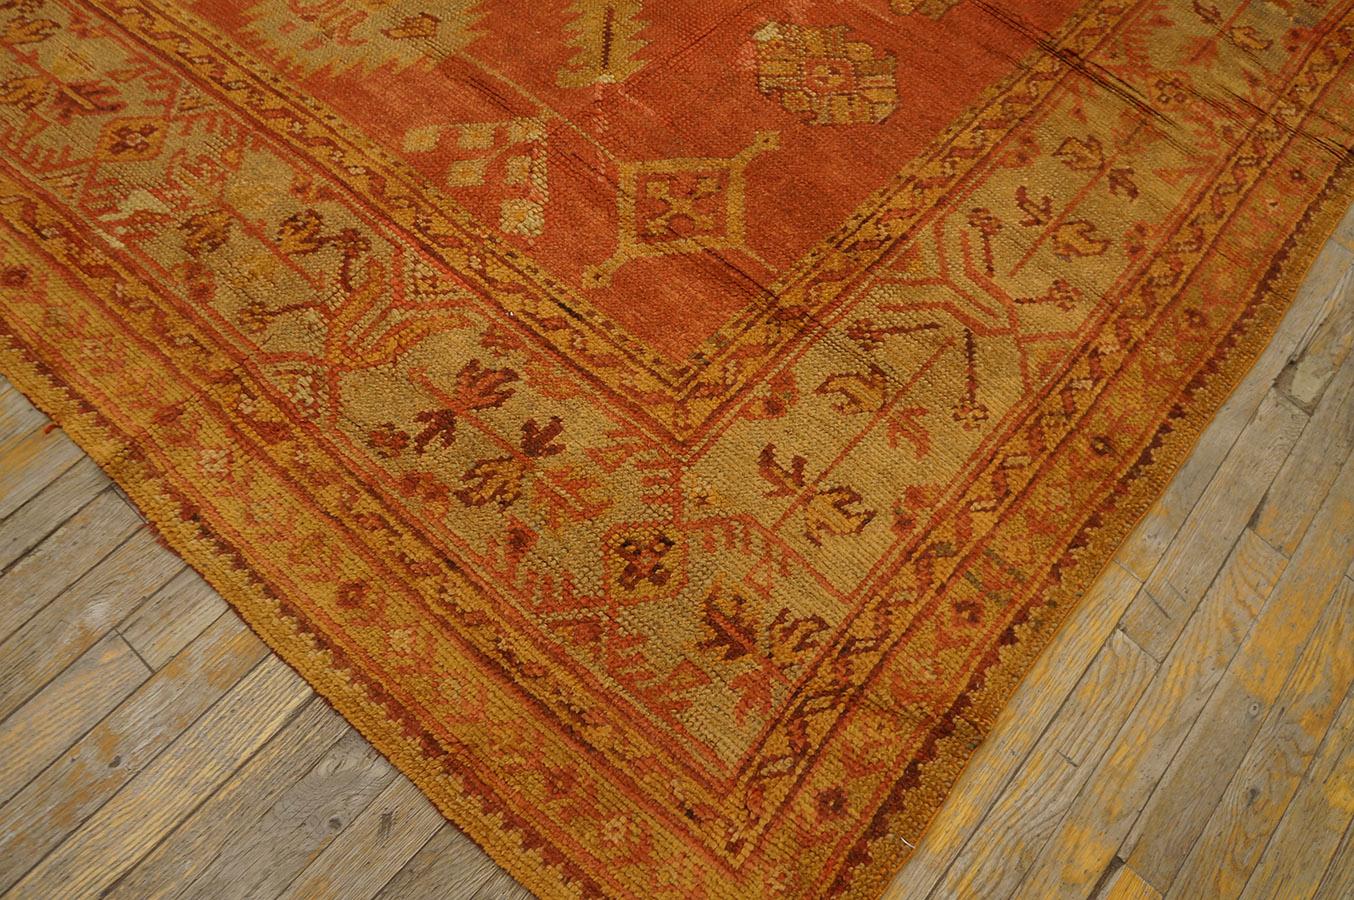 Early 20th Century Turkish Oushak Carpet ( 10'5'' x 12'6'' - 318 x 382 ) For Sale 3